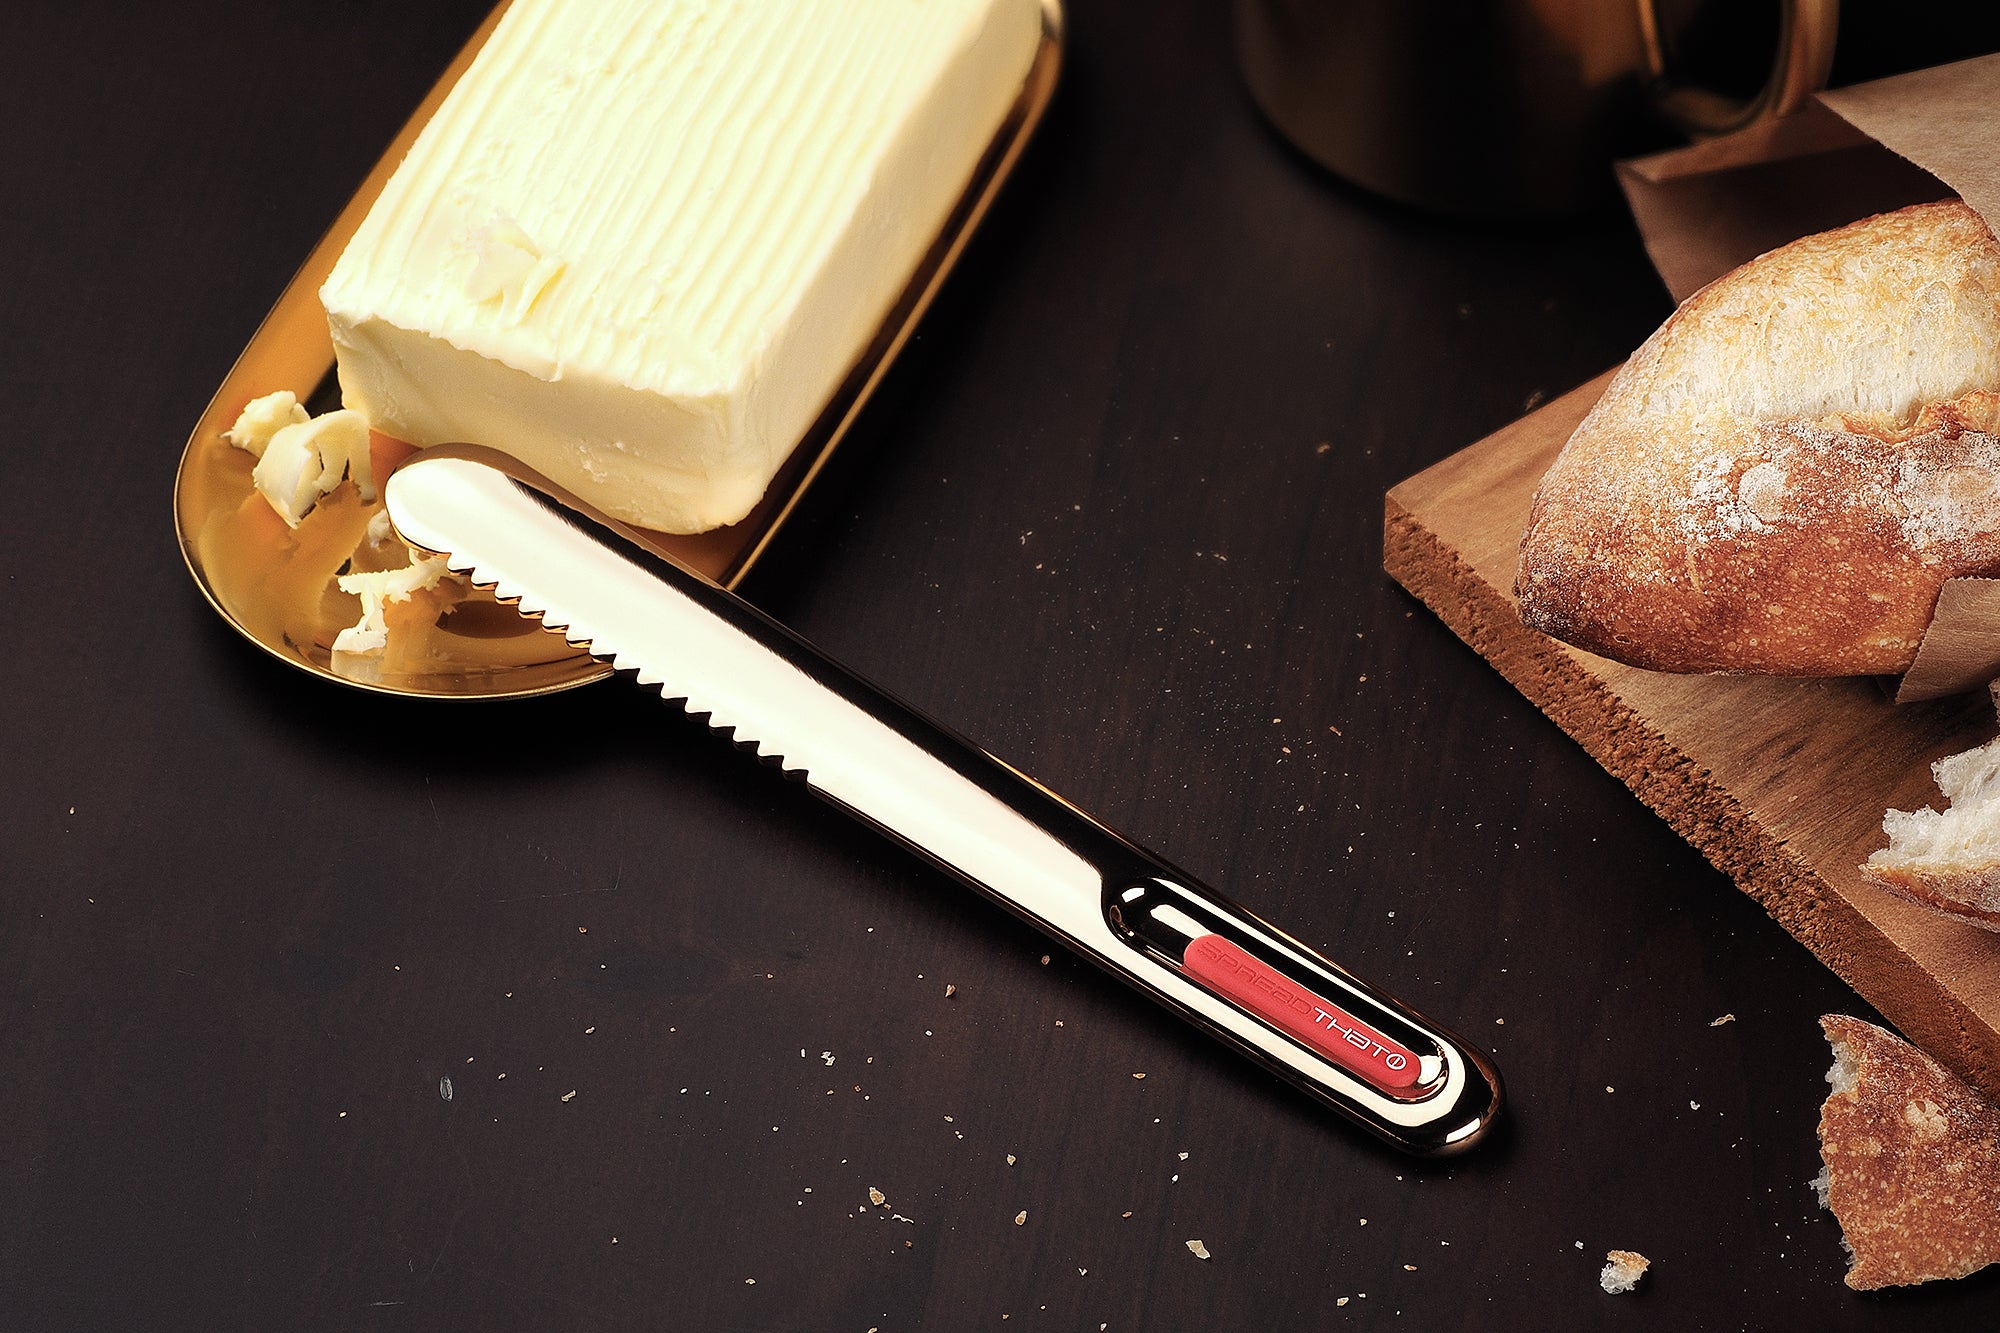 This Warming Butter Knife Won't Change Your Life But It'll Make Spreading  Butter, PB and Cream Cheese a Breeze